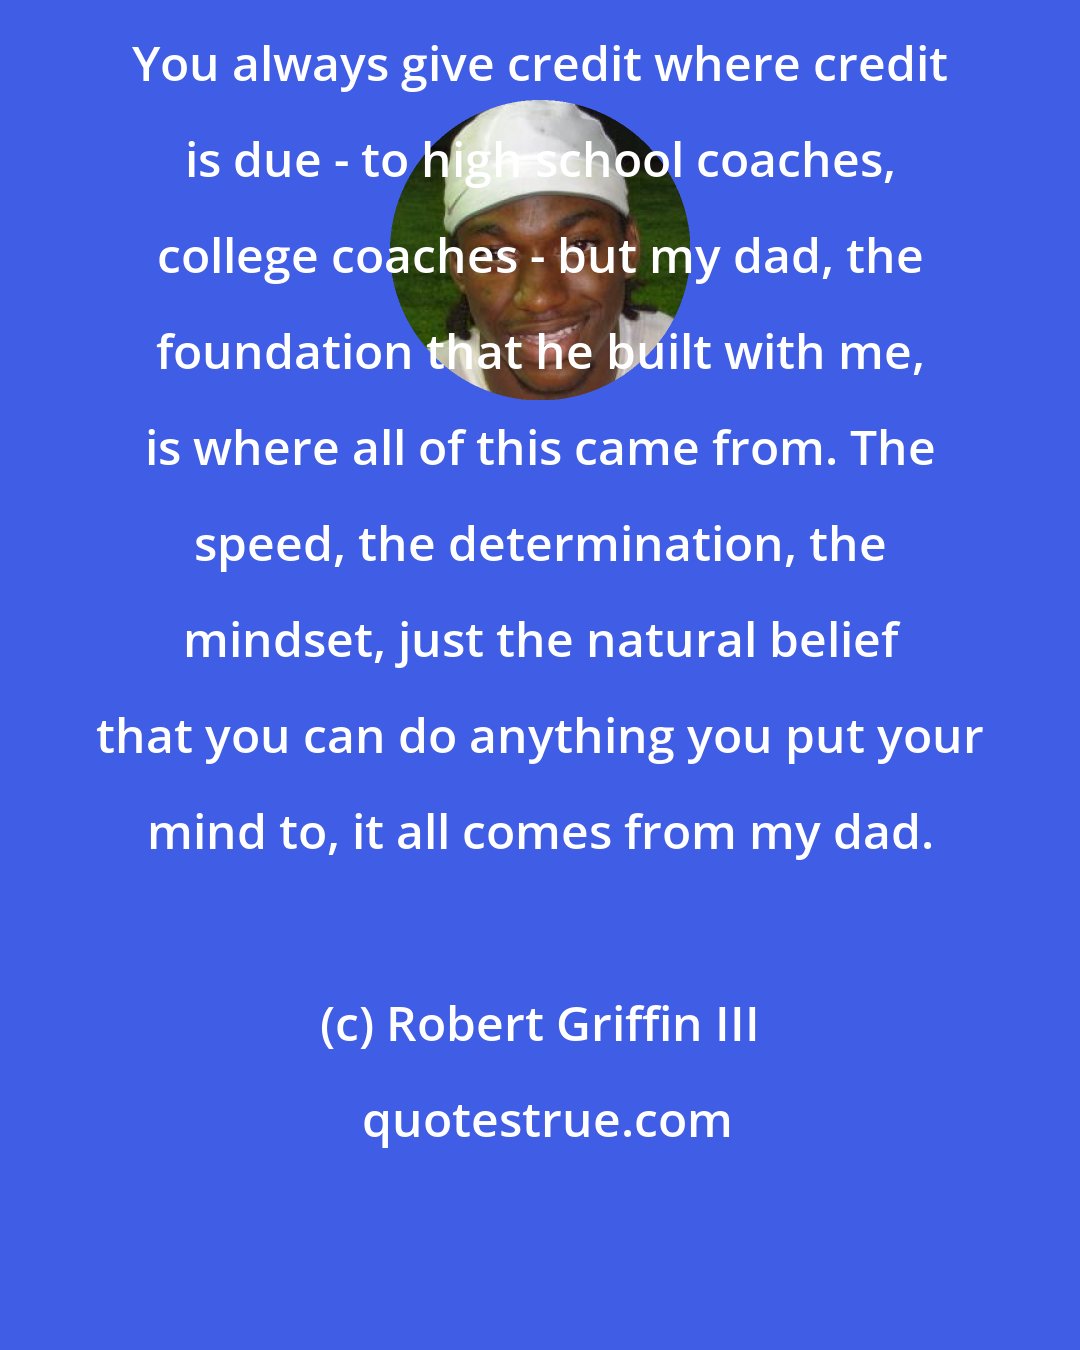 Robert Griffin III: You always give credit where credit is due - to high school coaches, college coaches - but my dad, the foundation that he built with me, is where all of this came from. The speed, the determination, the mindset, just the natural belief that you can do anything you put your mind to, it all comes from my dad.